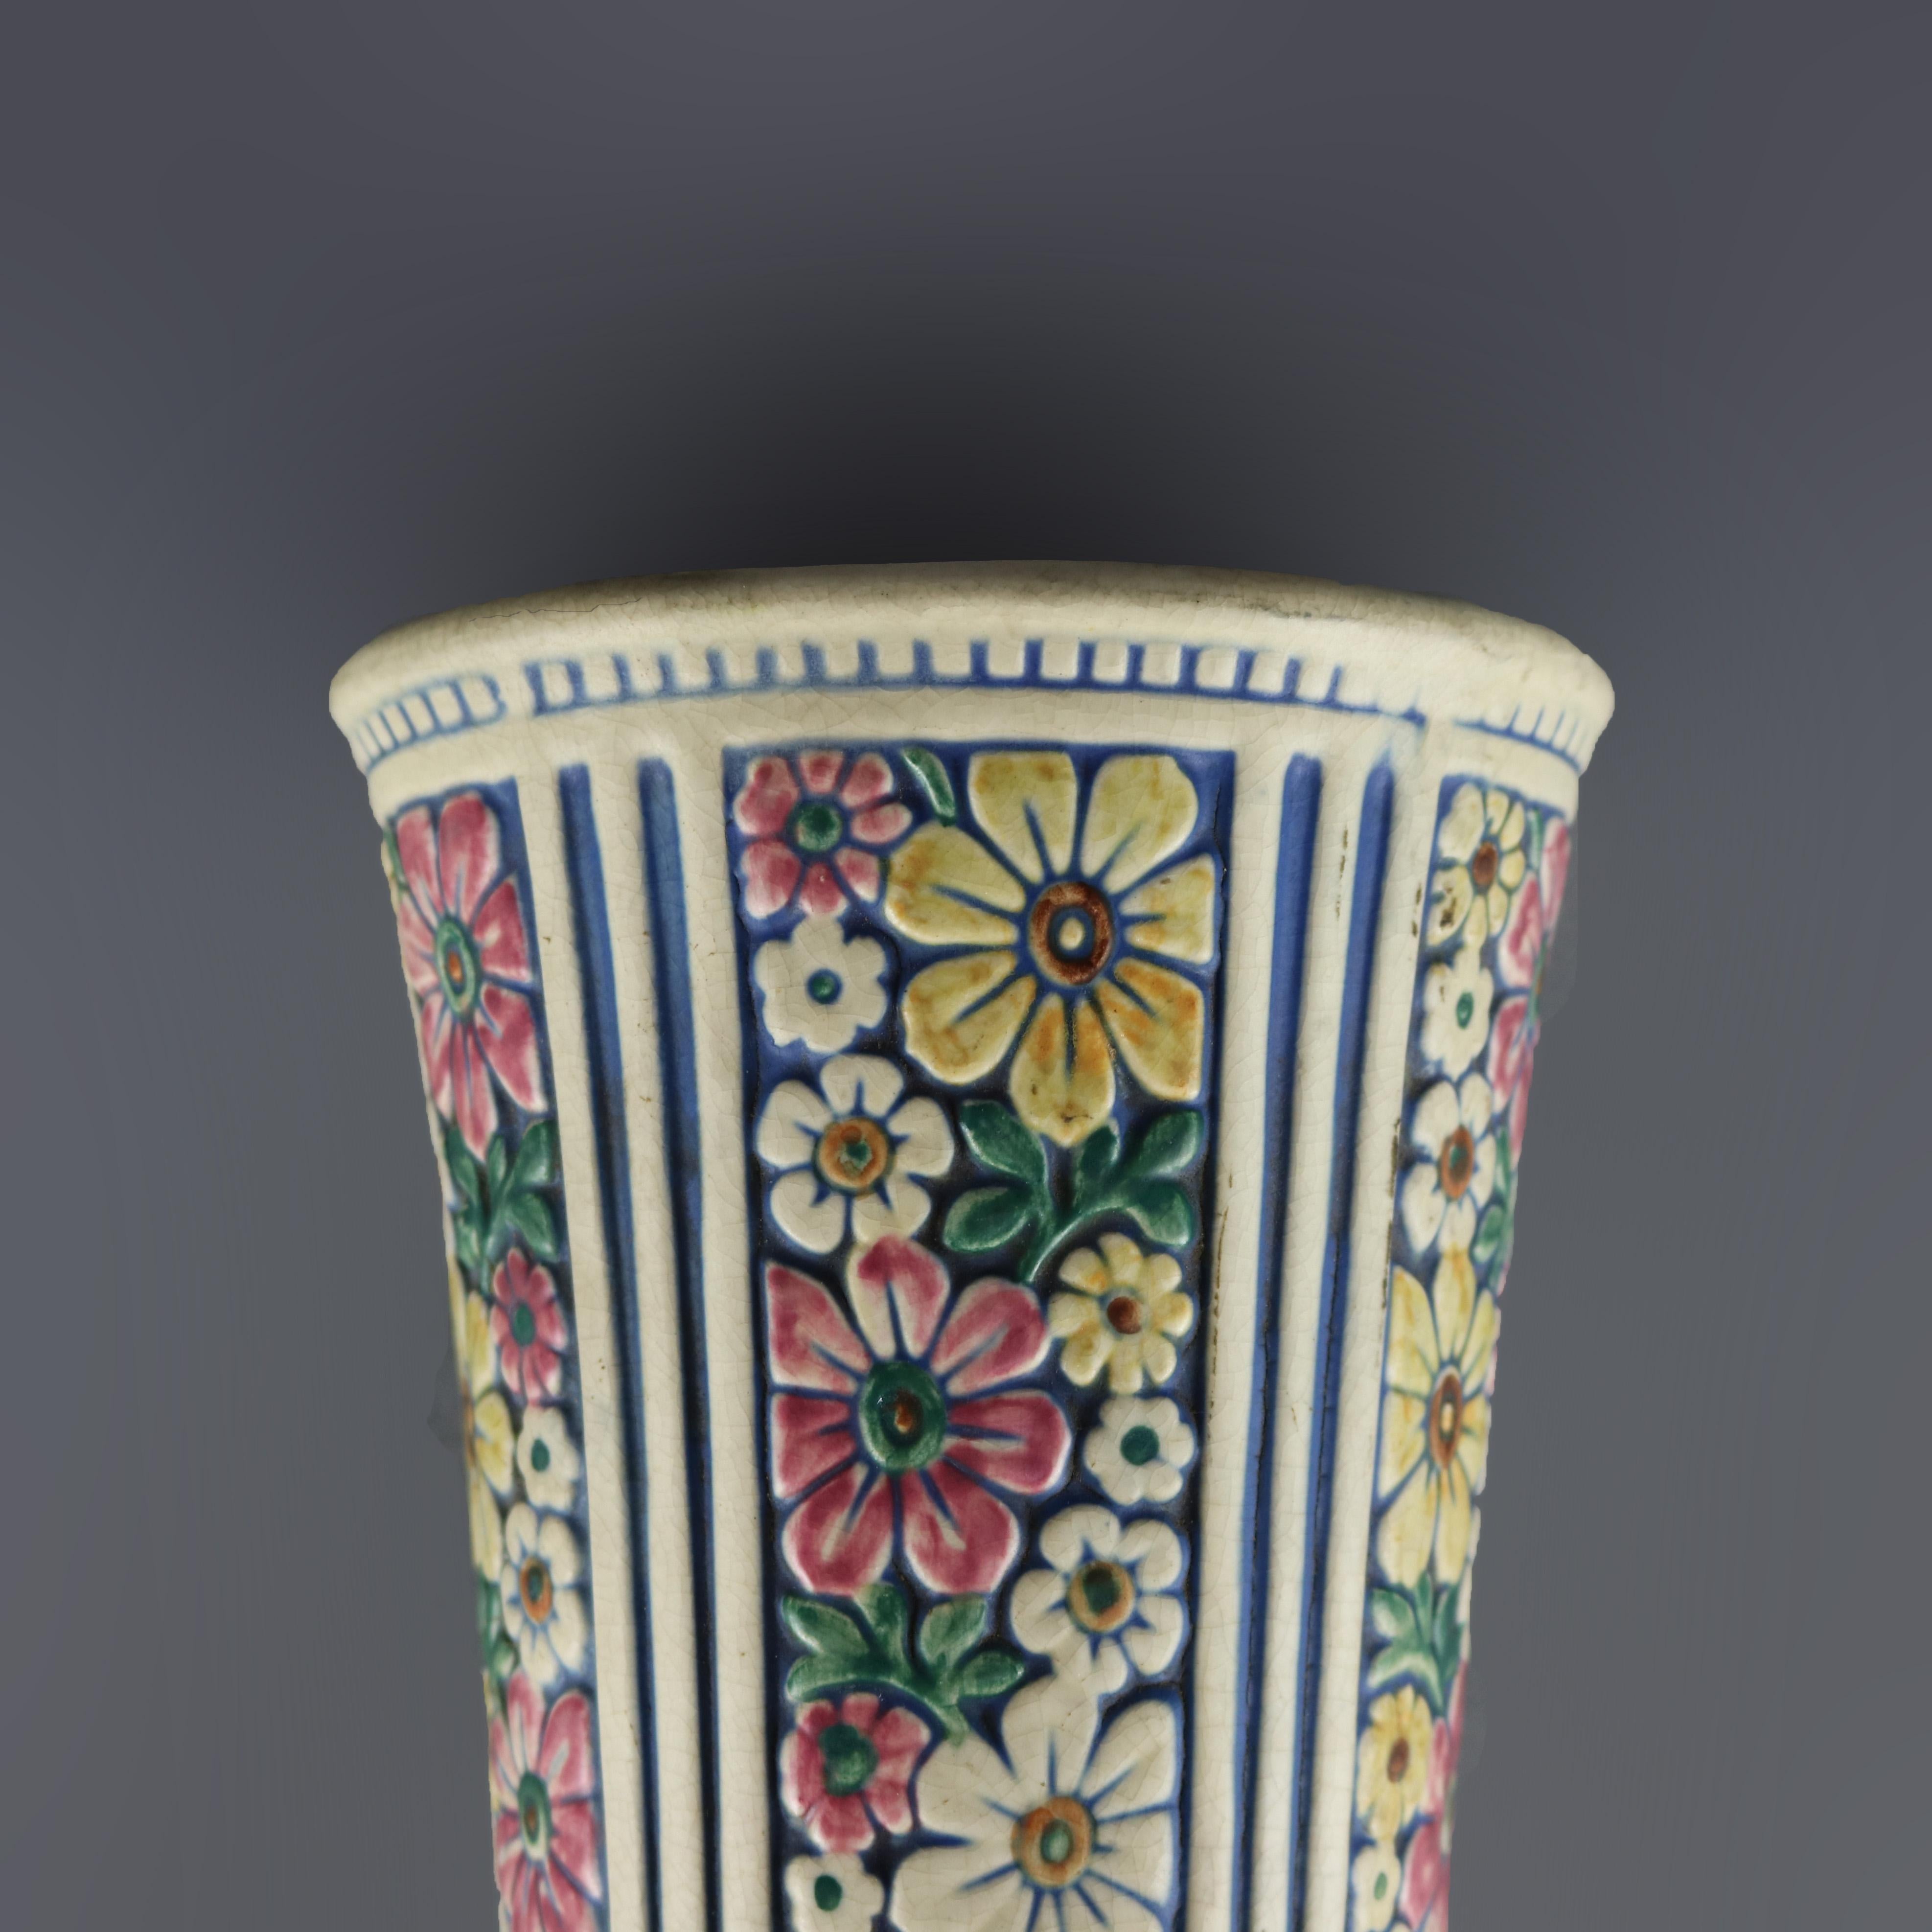 An antique art pottery wall pocket by Weller offers flared vase form with vertical floral over reeded base, maker mark en verso as photographed, circa 1930

Measures: 9.5